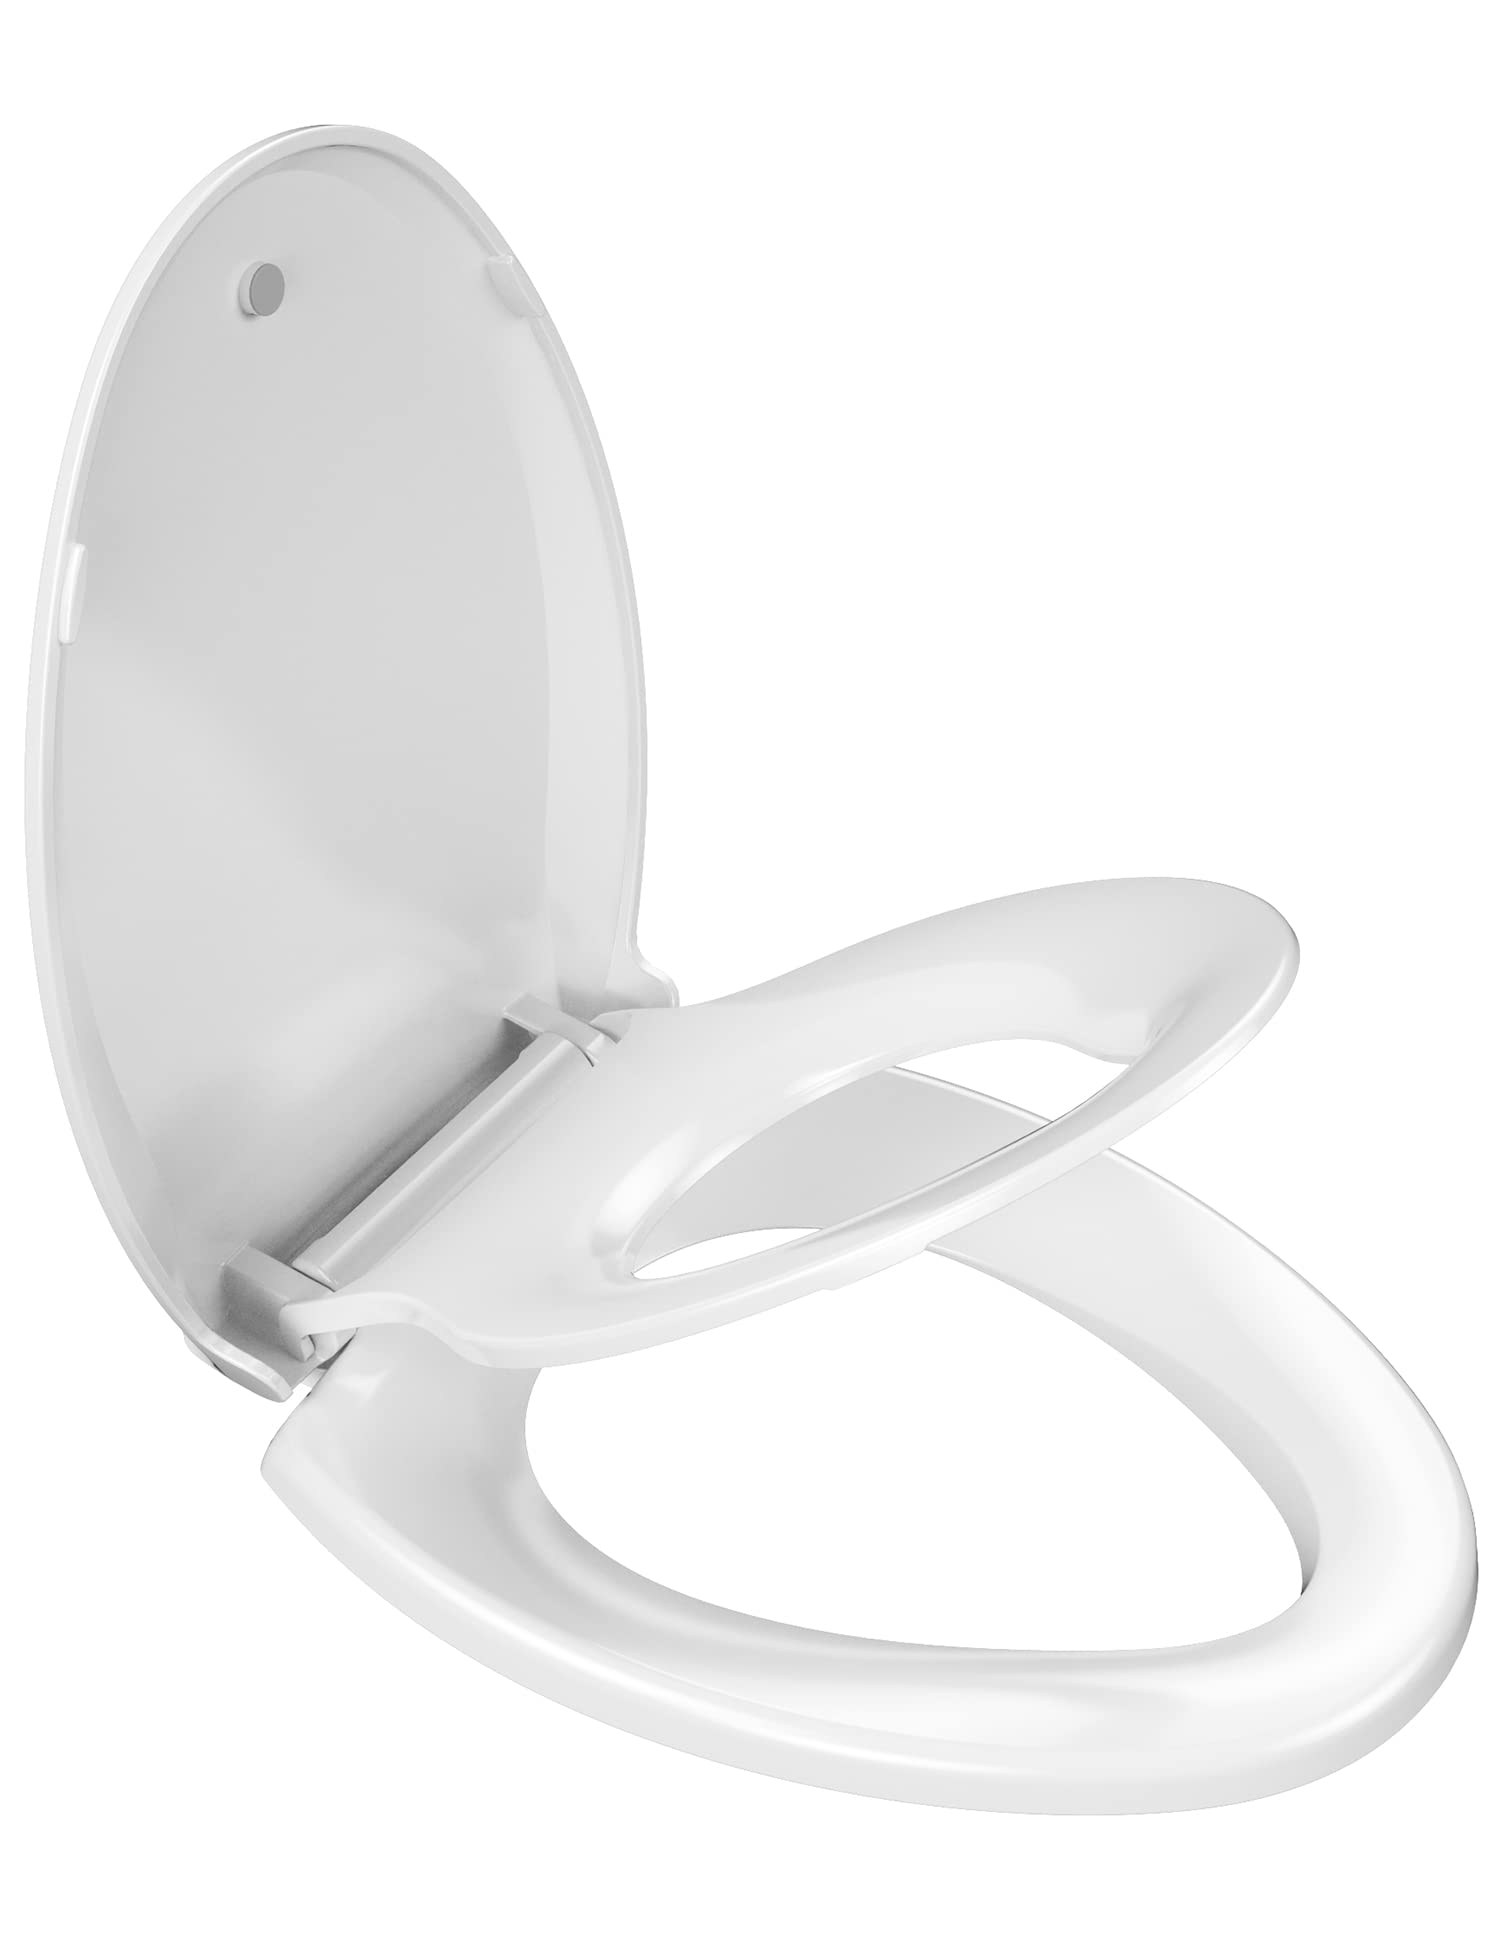 YASFEL Toilet Seat with Toddler Toilet Seat Built in, Plastic, Elongated Slow Close with Magnets For Potty Training For Kids & Adults (White, 18.5”)